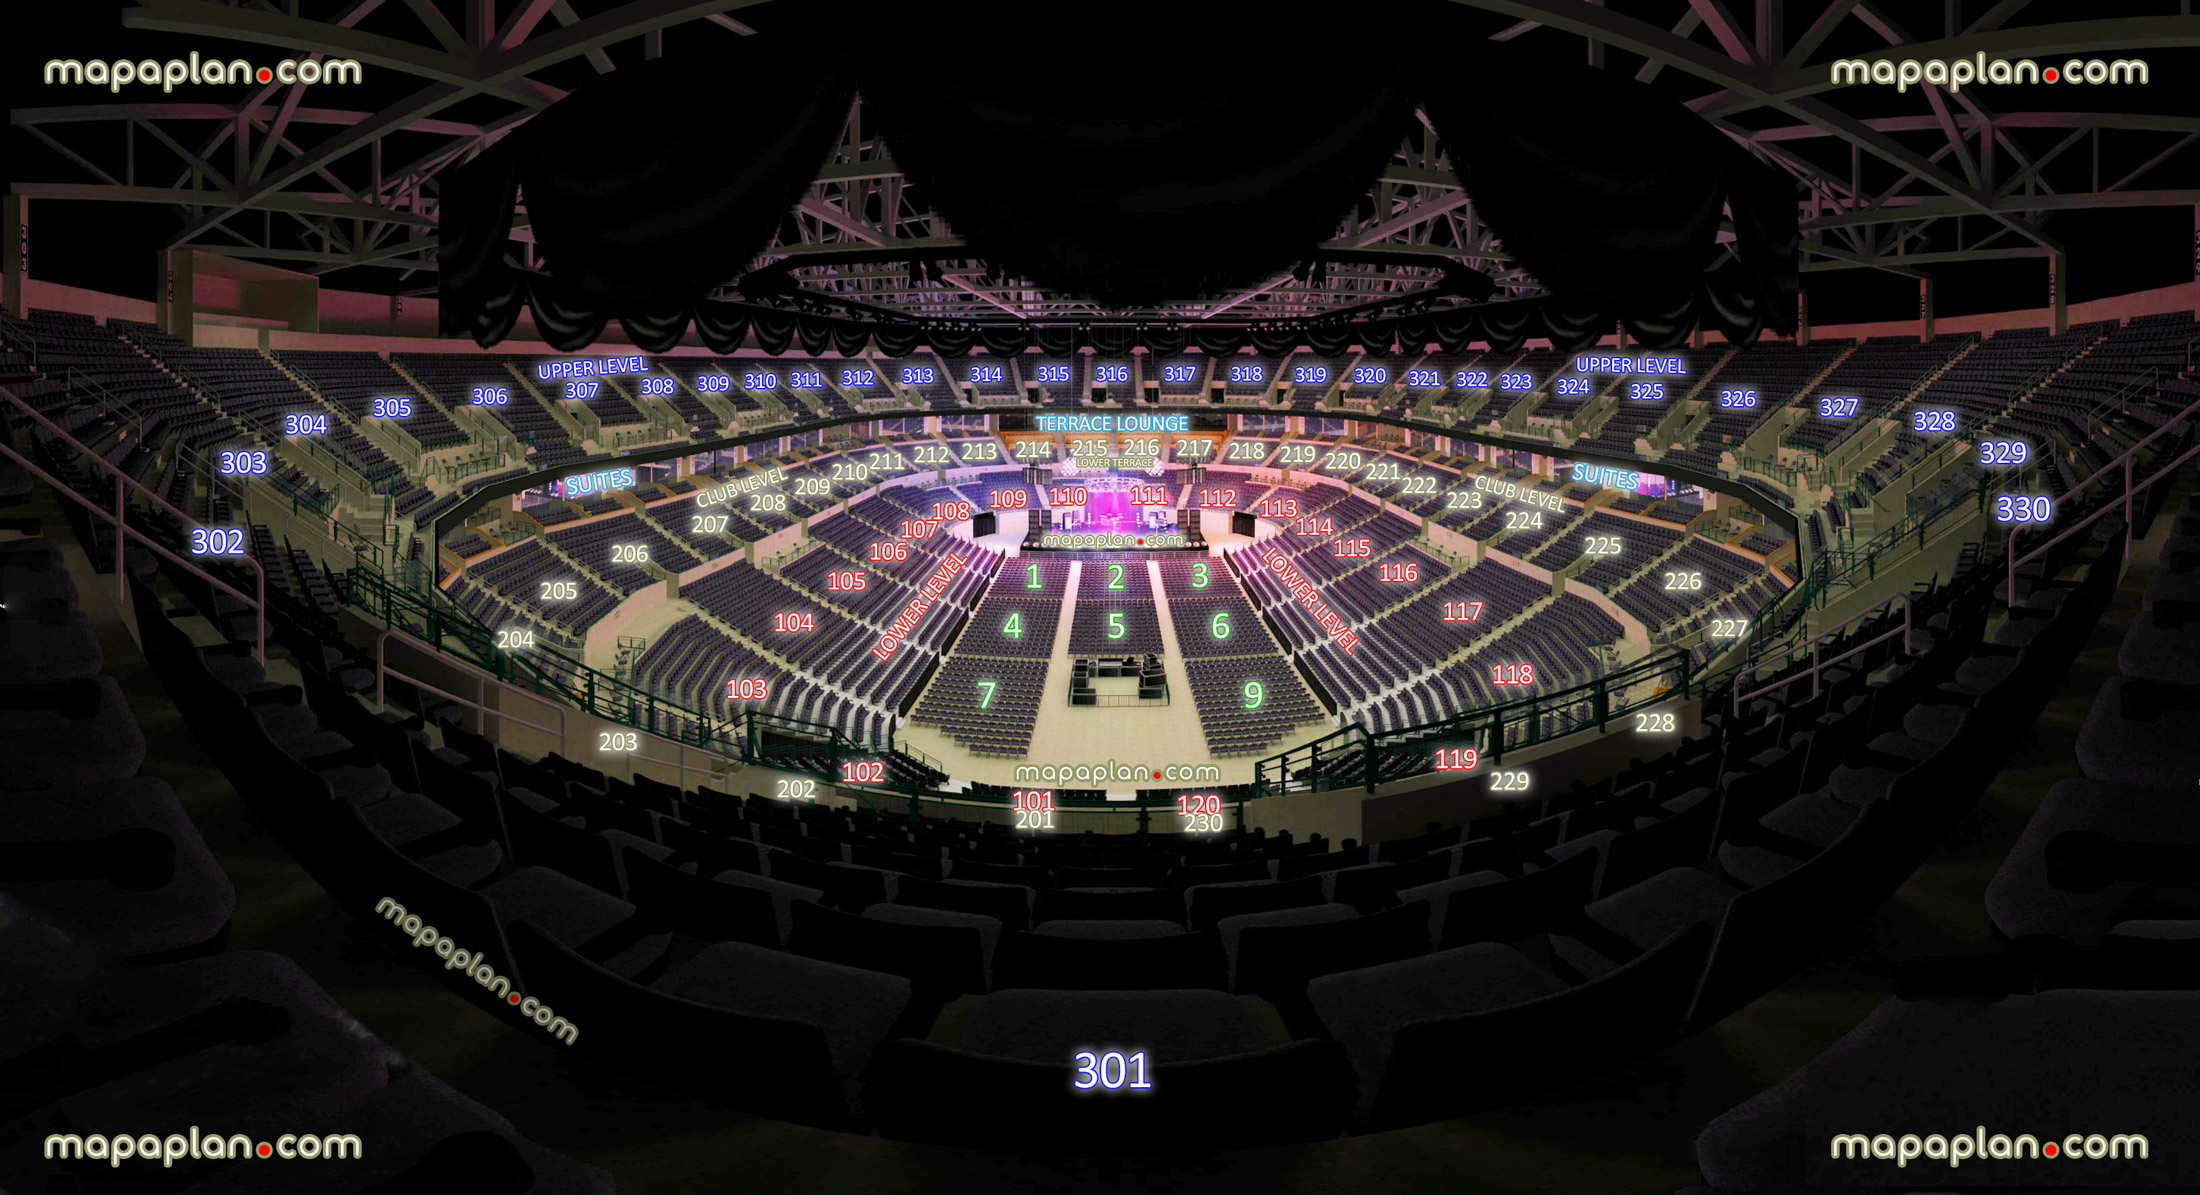 view section 301 row m seat 8 virtual venue 3d interactive inside stage review tour concert picture center floor lower club upper loud city level suites terrace lounge Oklahoma City Chesapeake Energy Arena seating chart